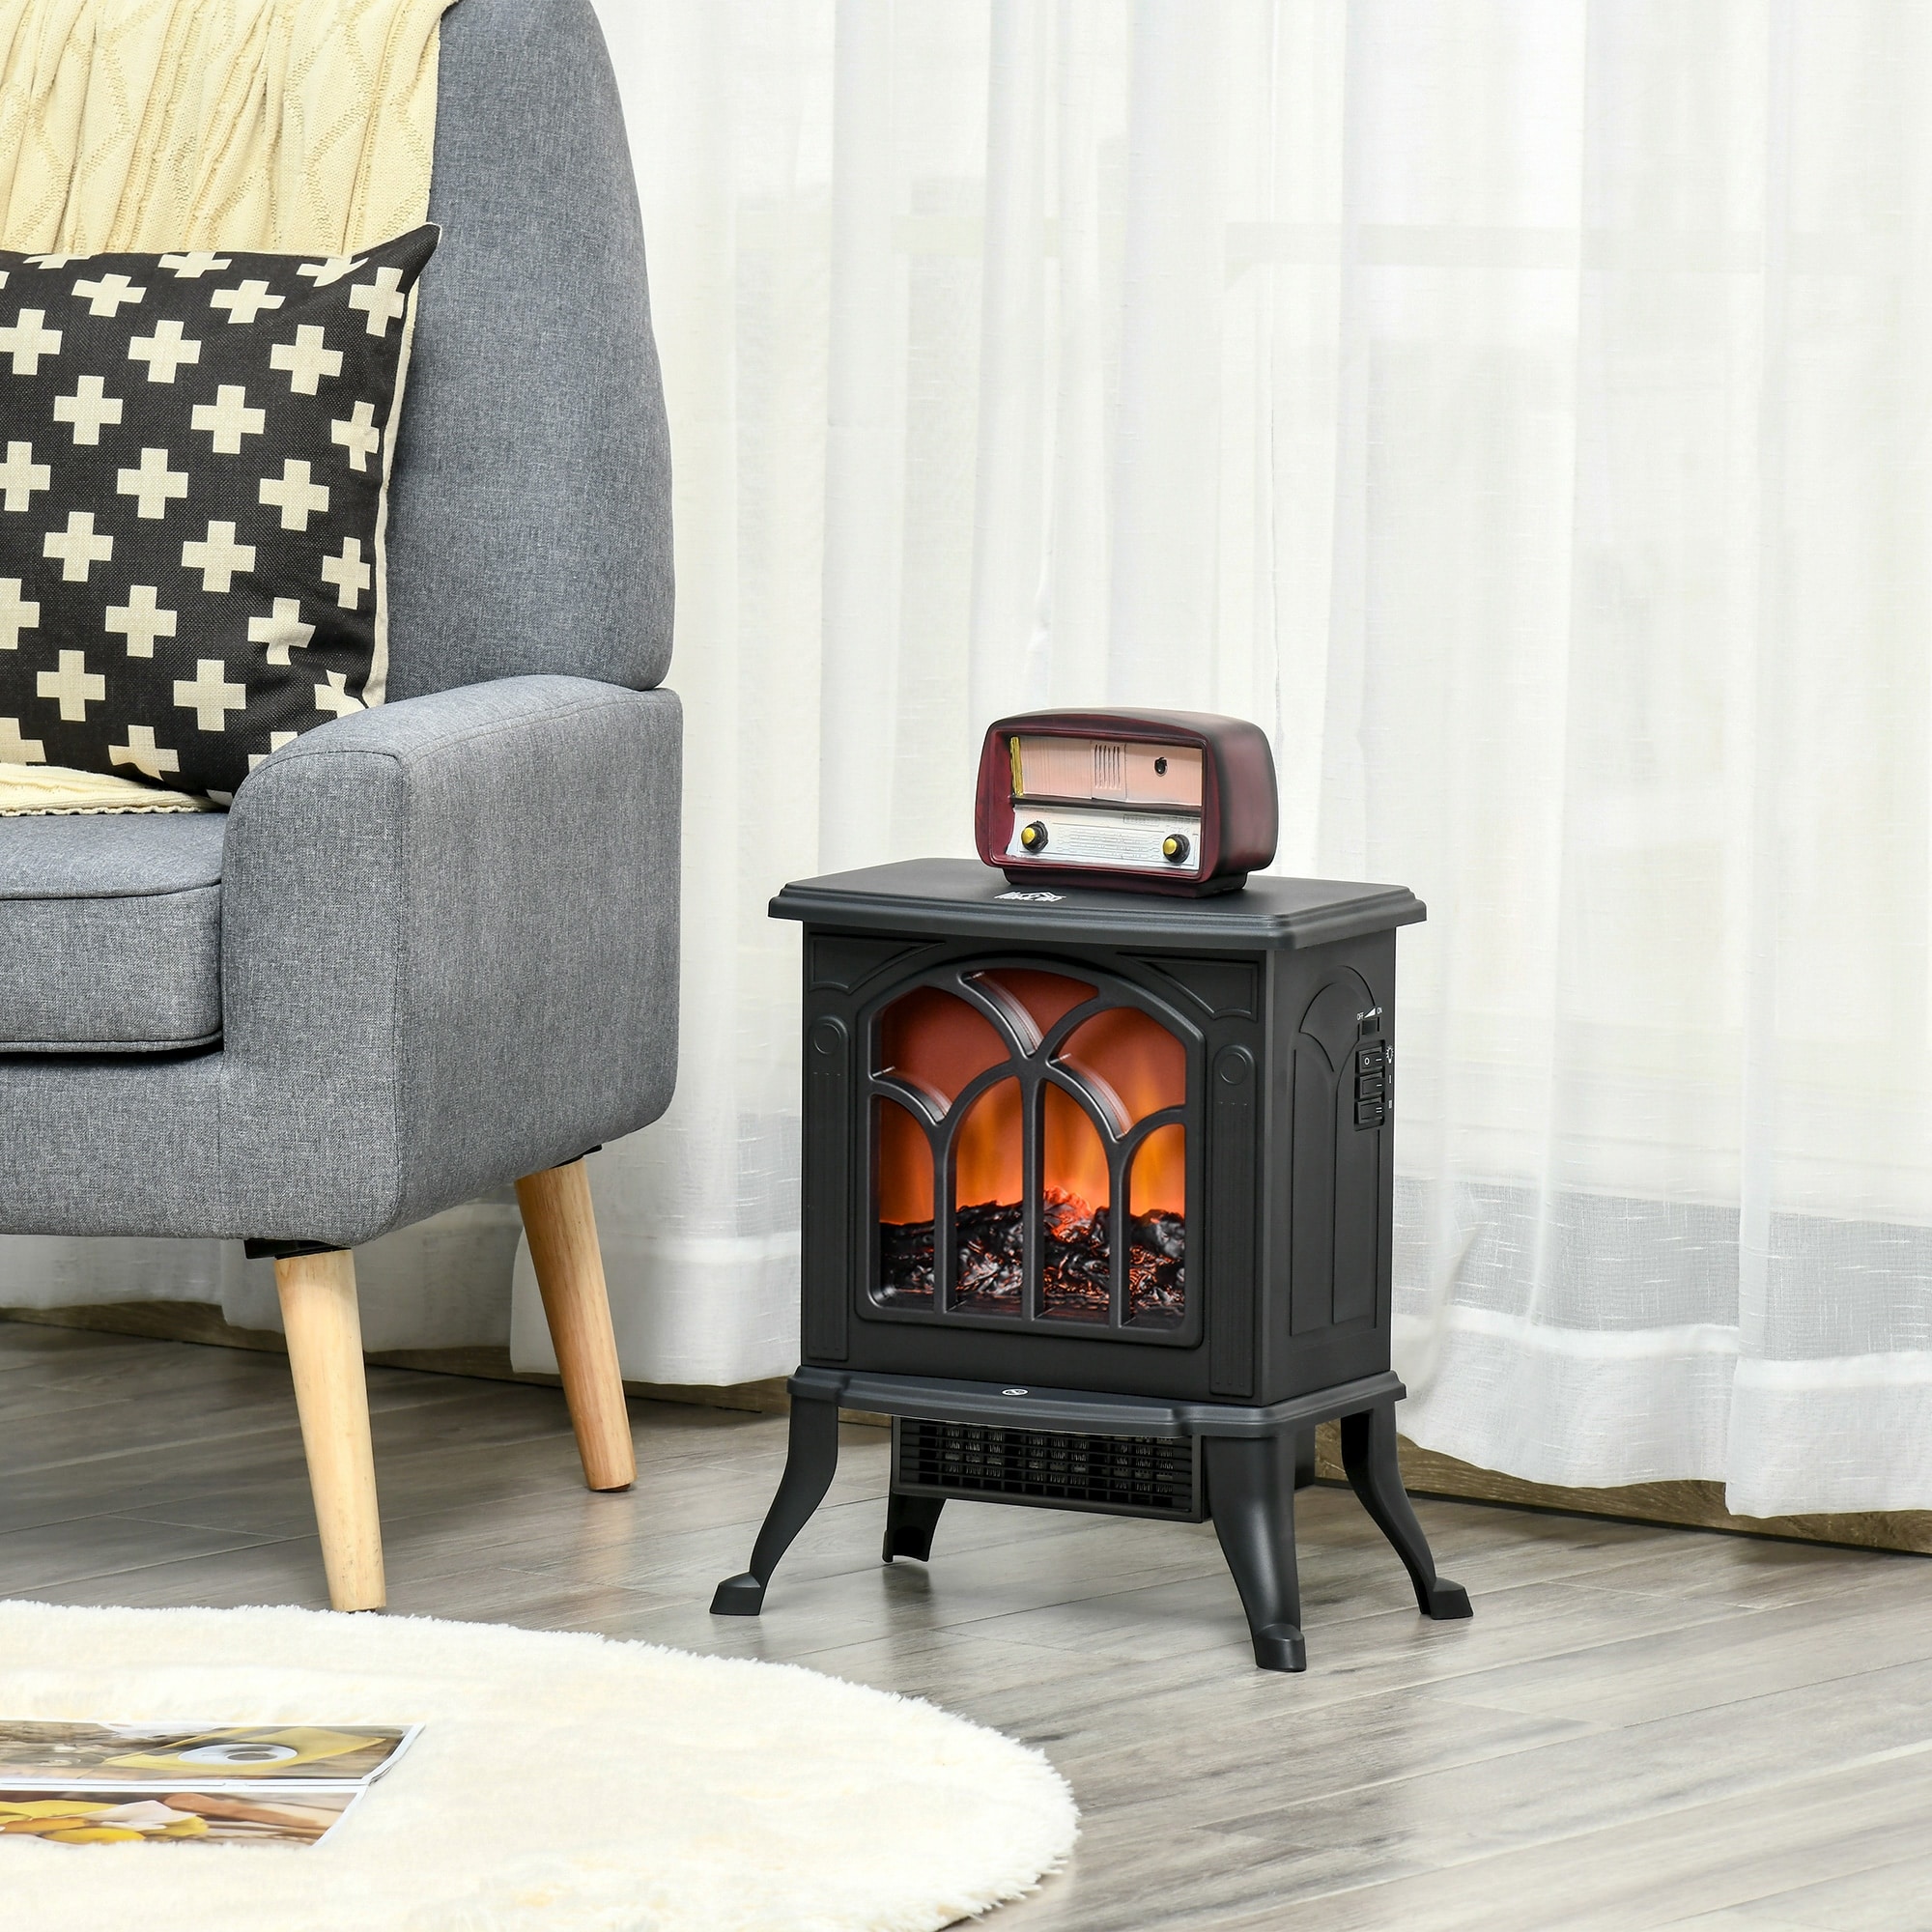 https://ak1.ostkcdn.com/images/products/is/images/direct/d335293f6e0a44bb80121f29804daaab185e0b61/Freestanding-Electric-Fireplace-Stove%2C-Space-Heater-with-Realistic-Flame-Effect%2C-Adjustable-Temperature-and-Overheat-Protection.jpg